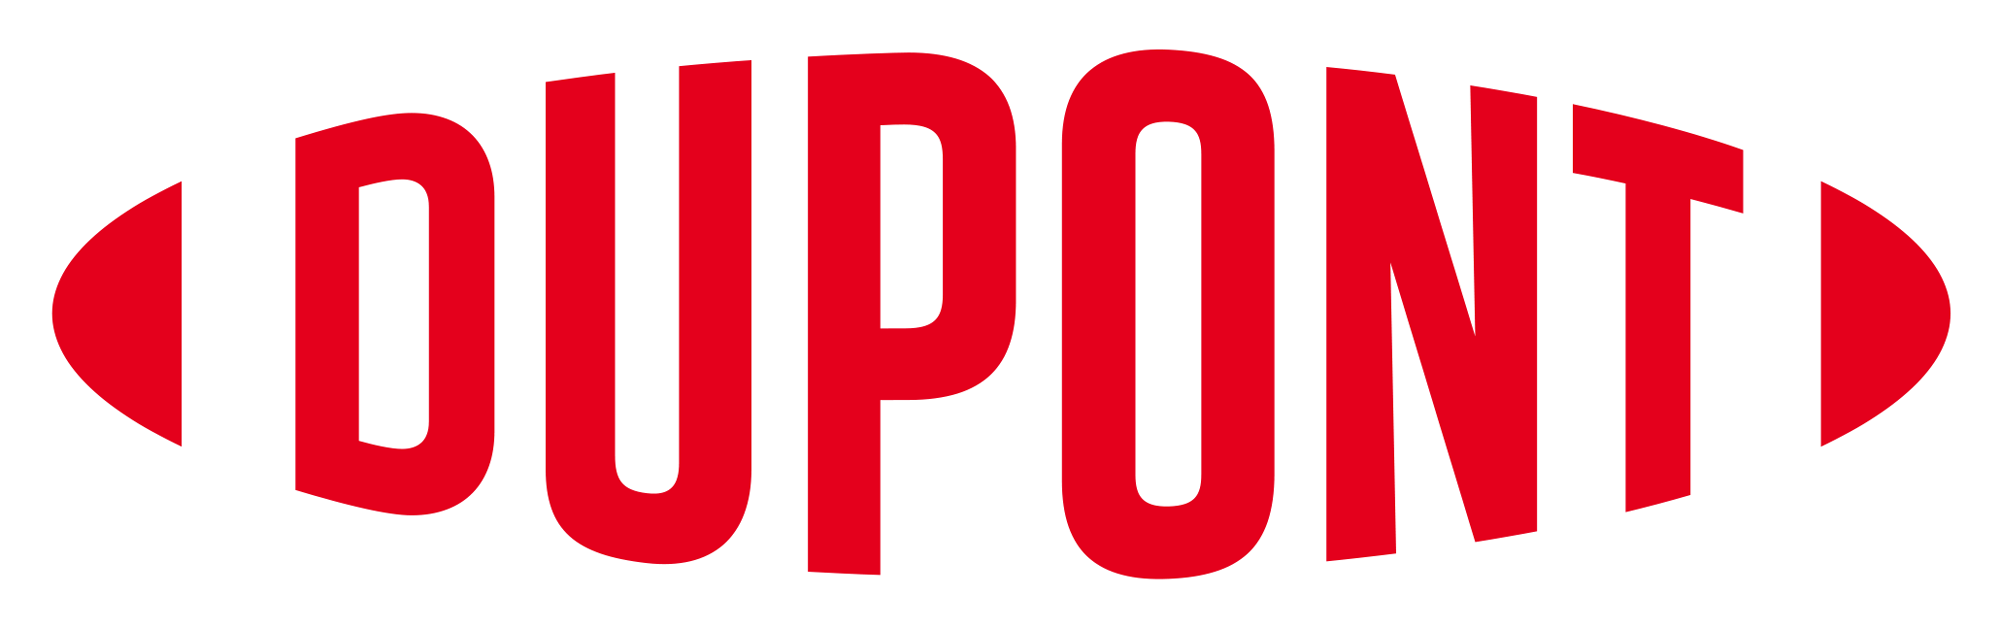 Brand New Logo - Brand New: New Logo and Identity for DuPont by Lippincott